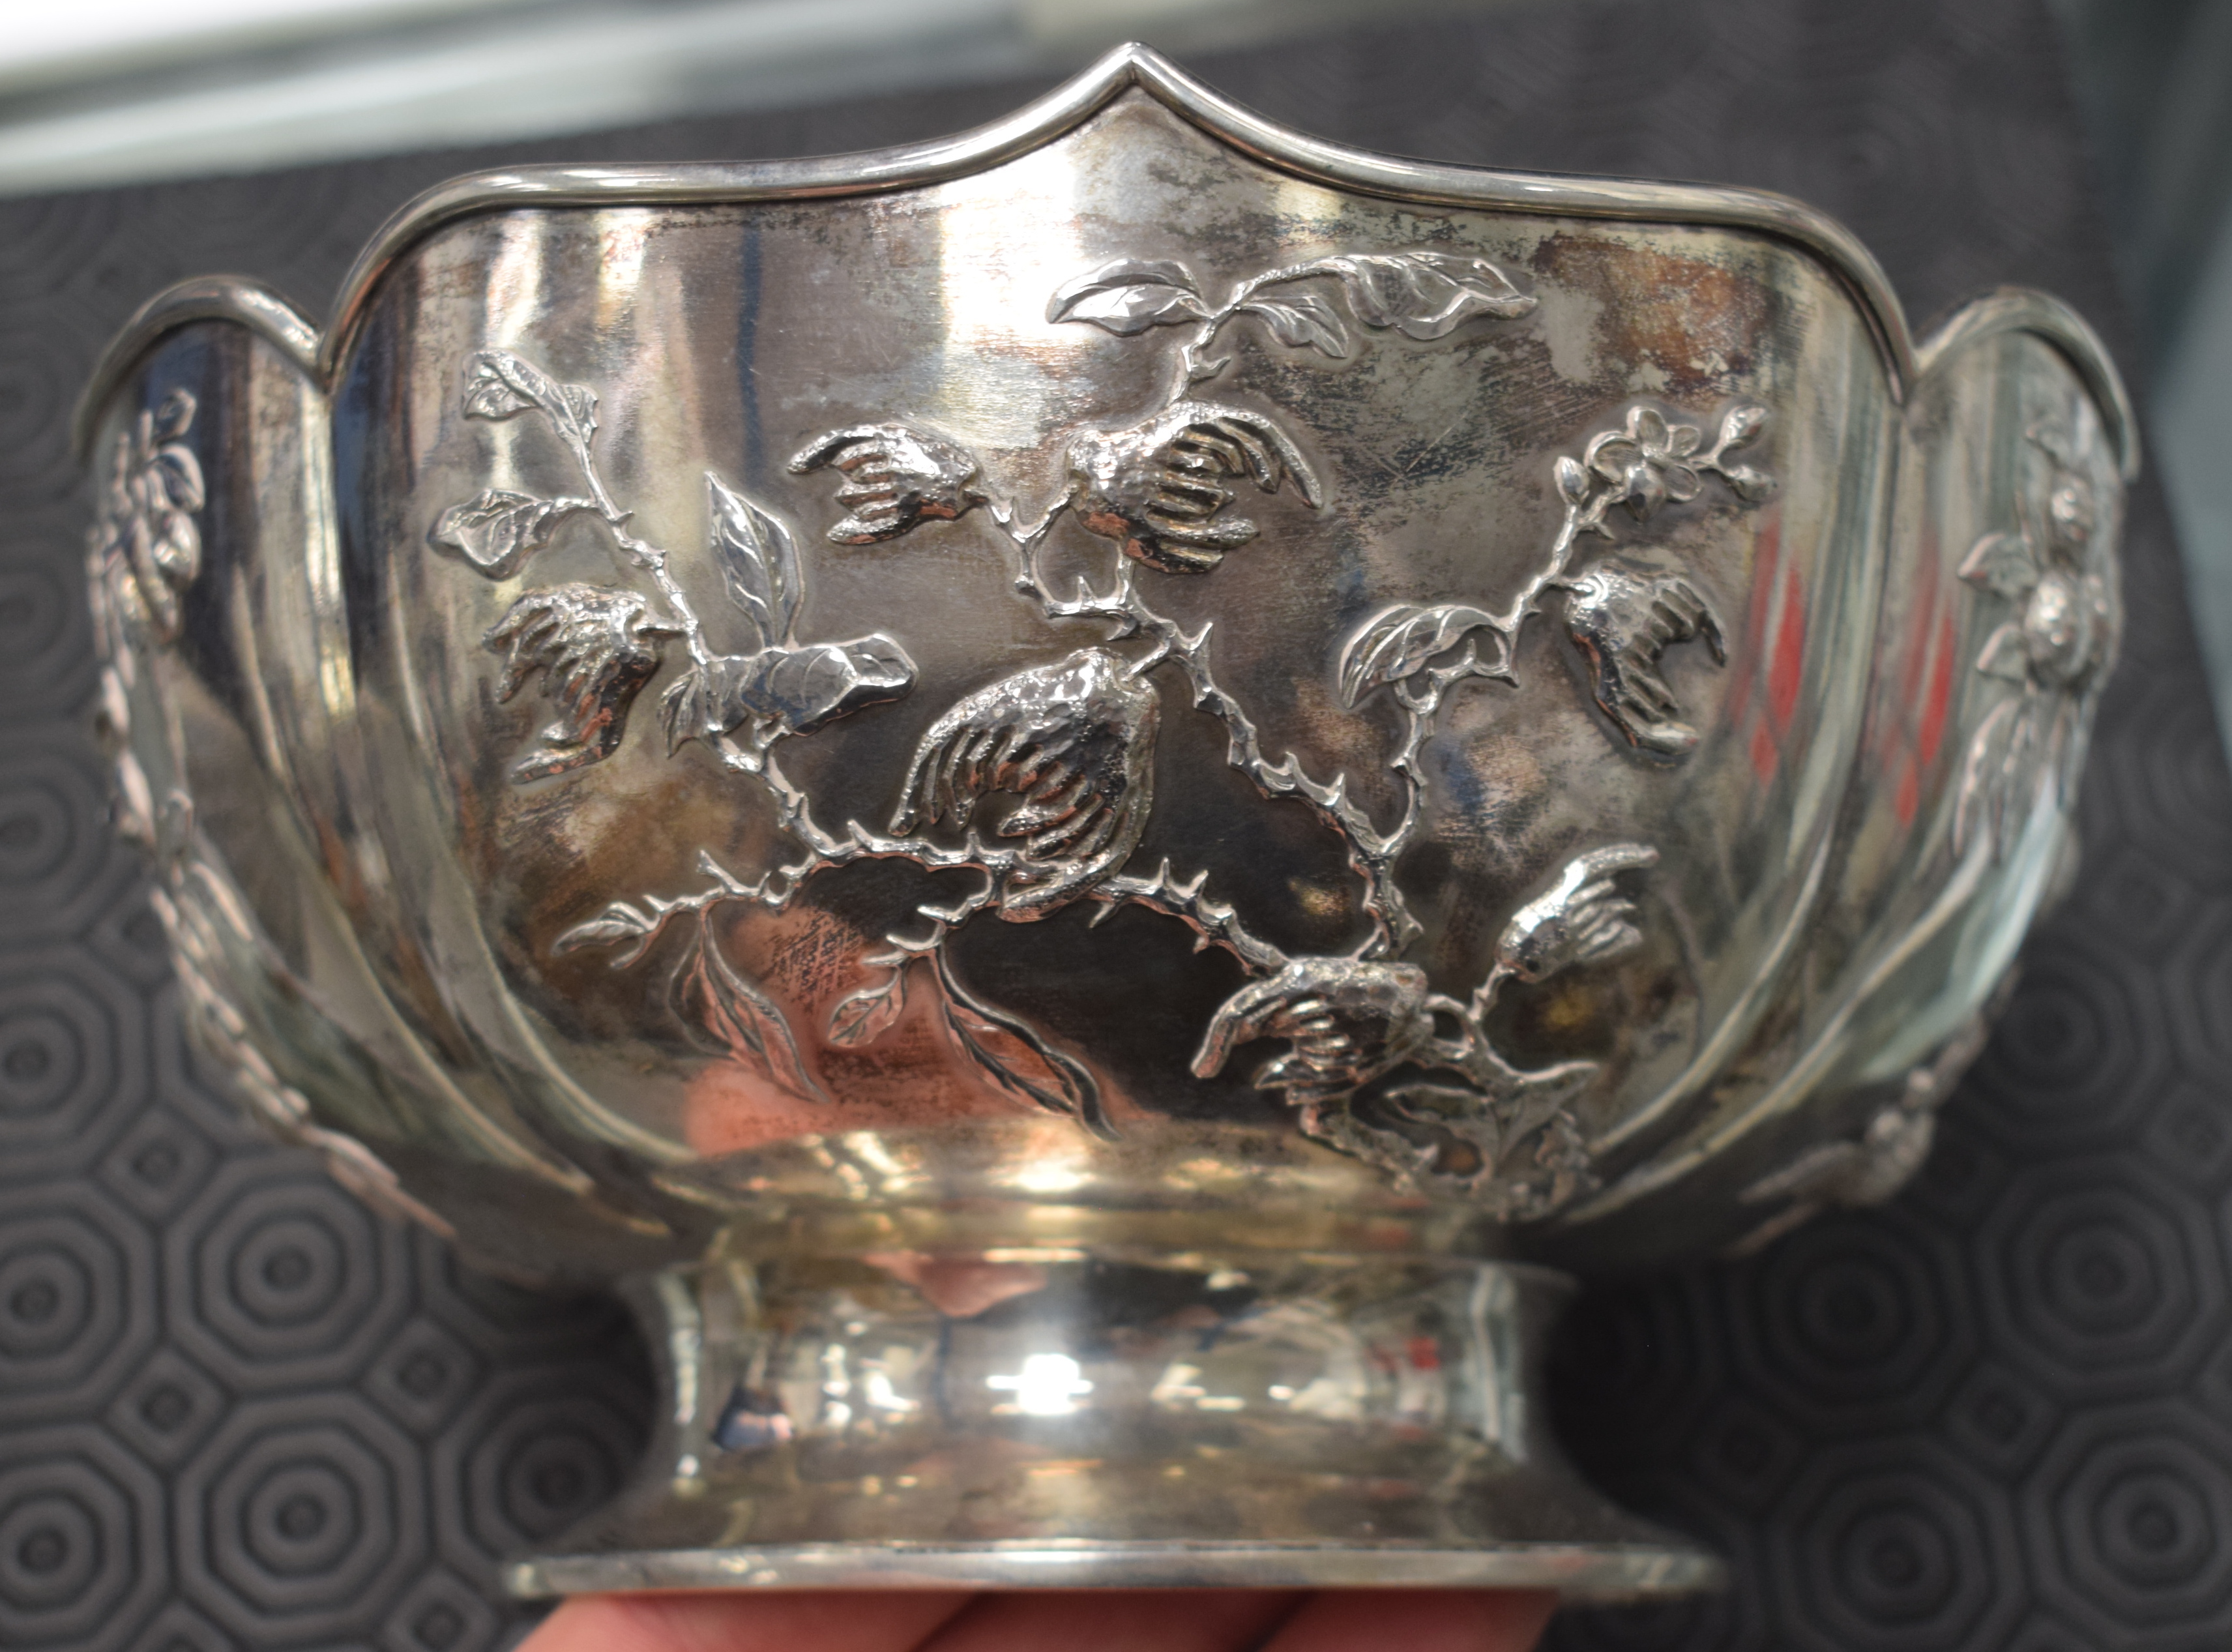 A LATE 19TH CENTURY CHINESE SCALLOPED SILVER BOWL by Zeewo, decorated with foliage and vines. 558 gr - Image 4 of 9